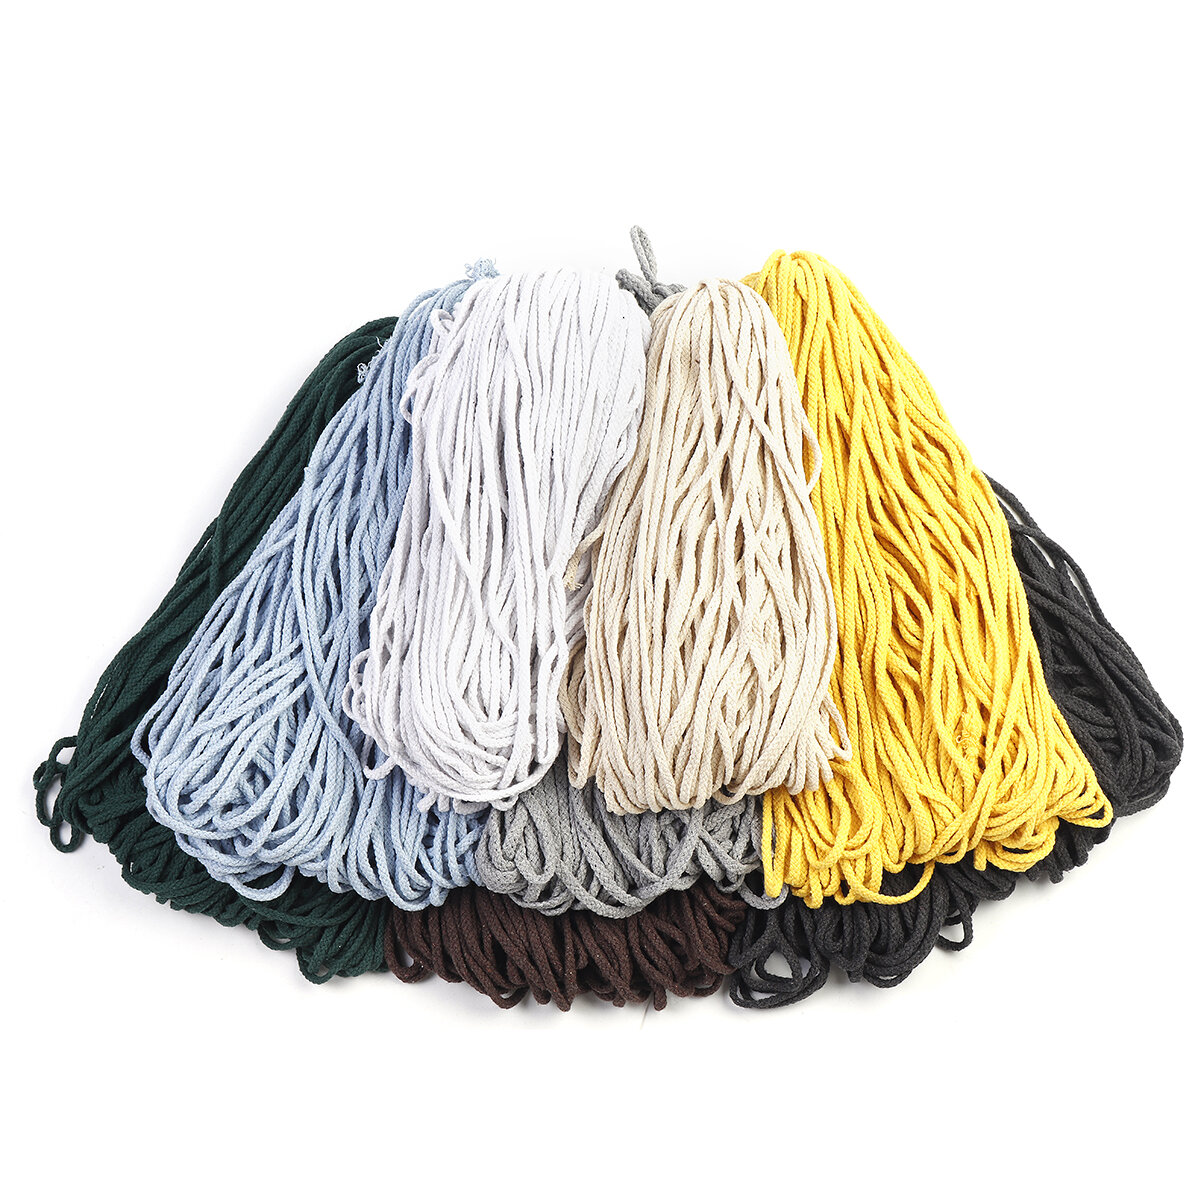 5mm 90m/Roll Cotton Rope Thread Cords String Macrame DIY Craft Wire 8 Strands